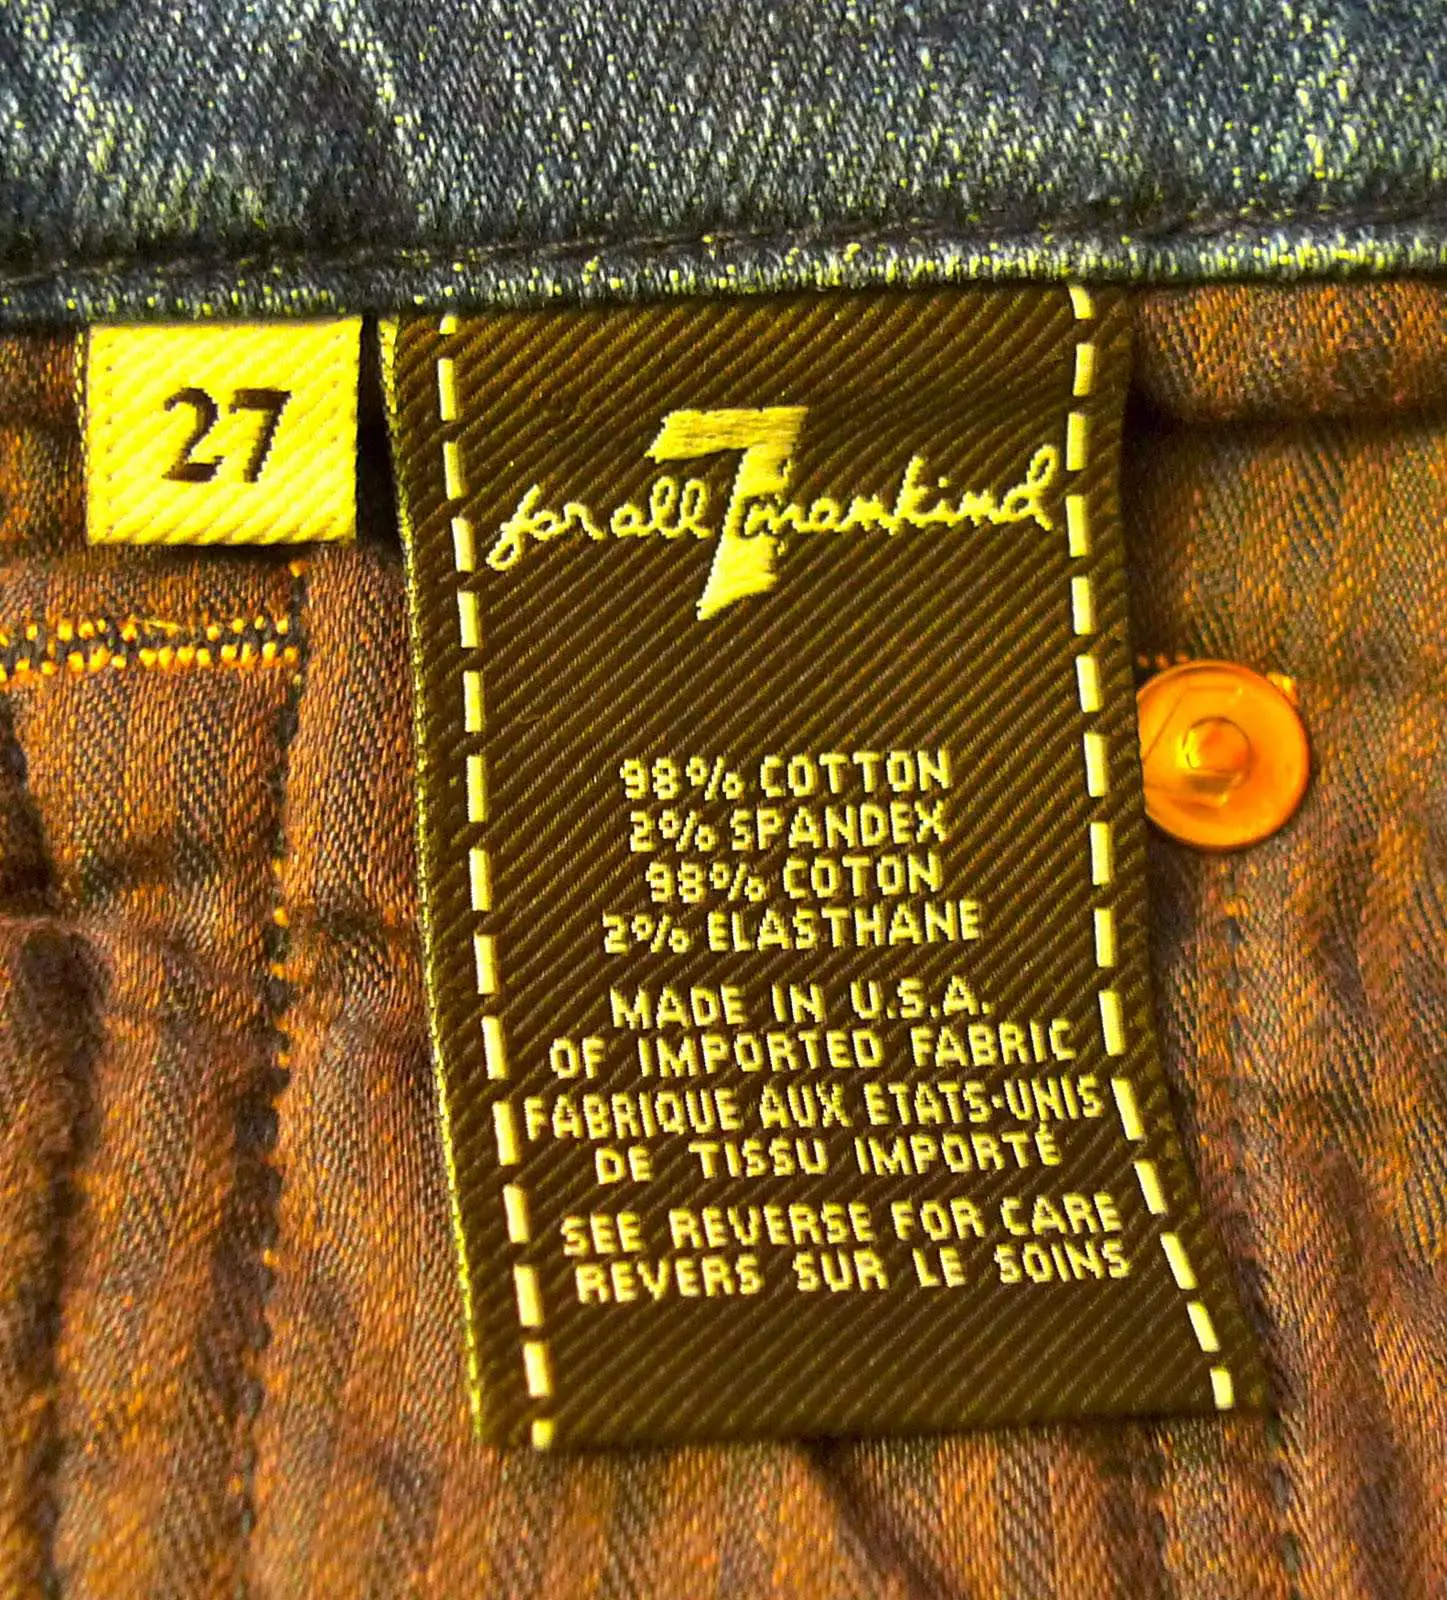 7 for All Mankind quality